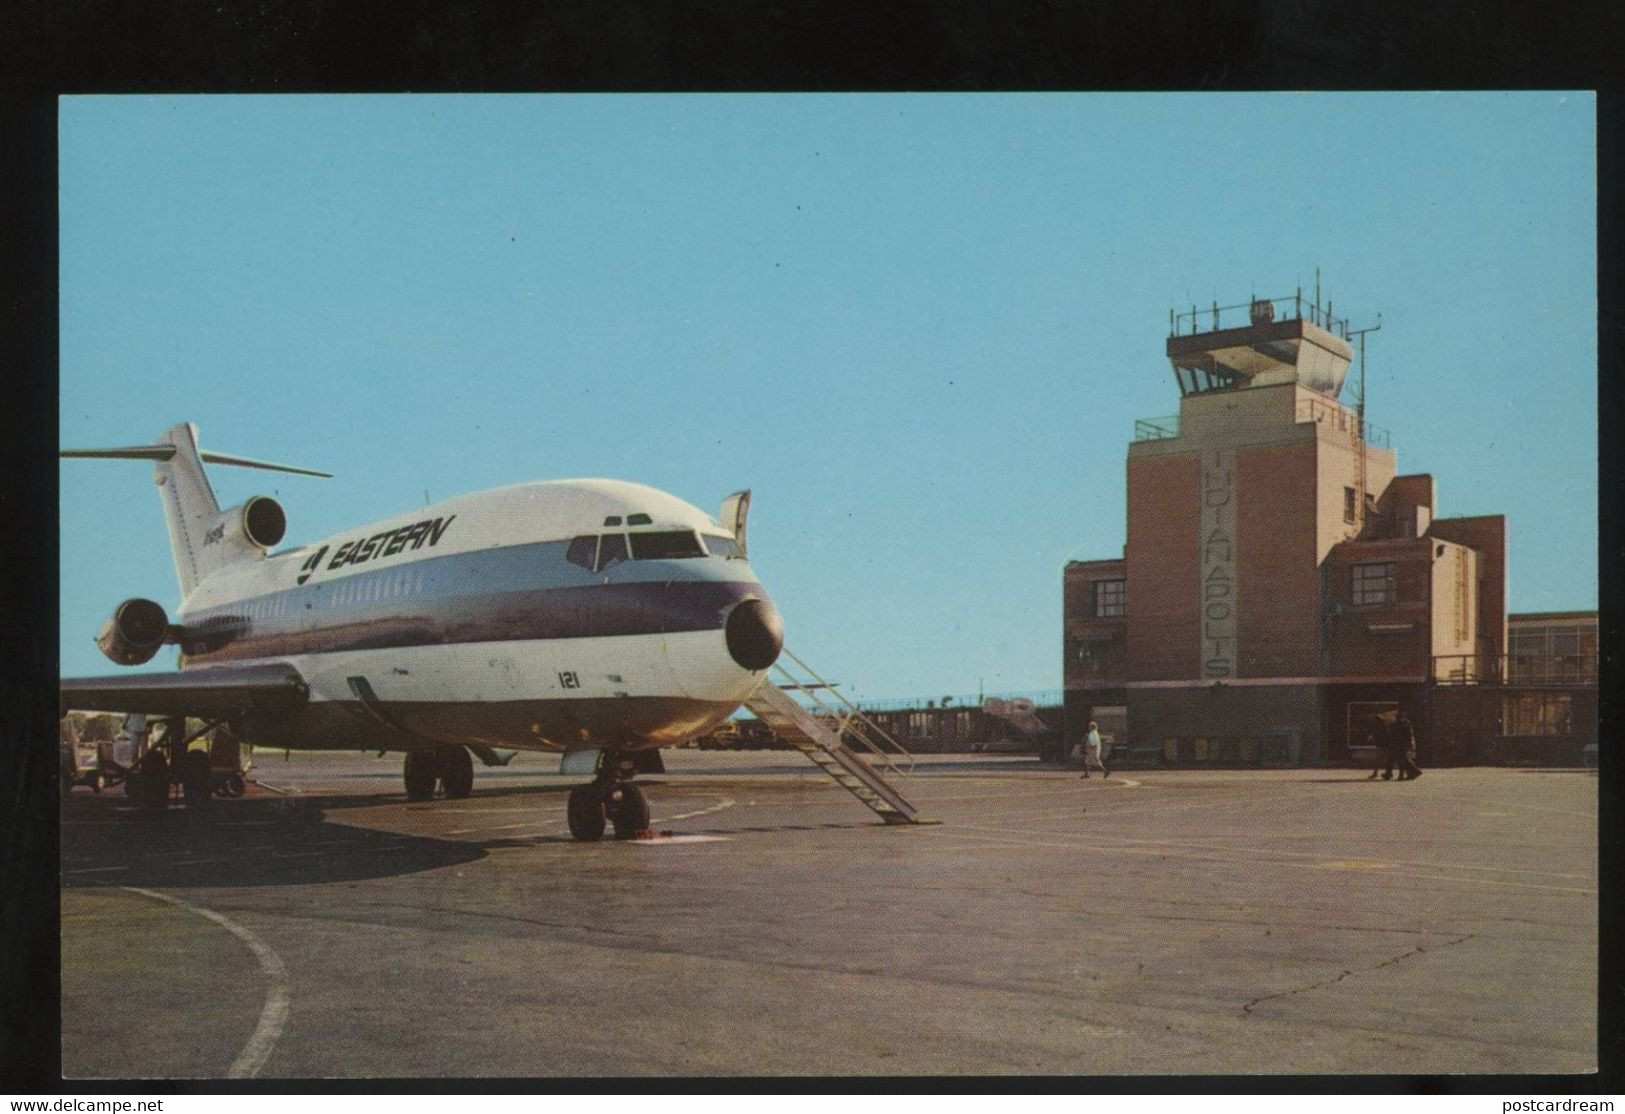 Weir Cook Municipal Airport IN Indianapolis Eastern Airlines 727 1965 Postcard - Indianapolis